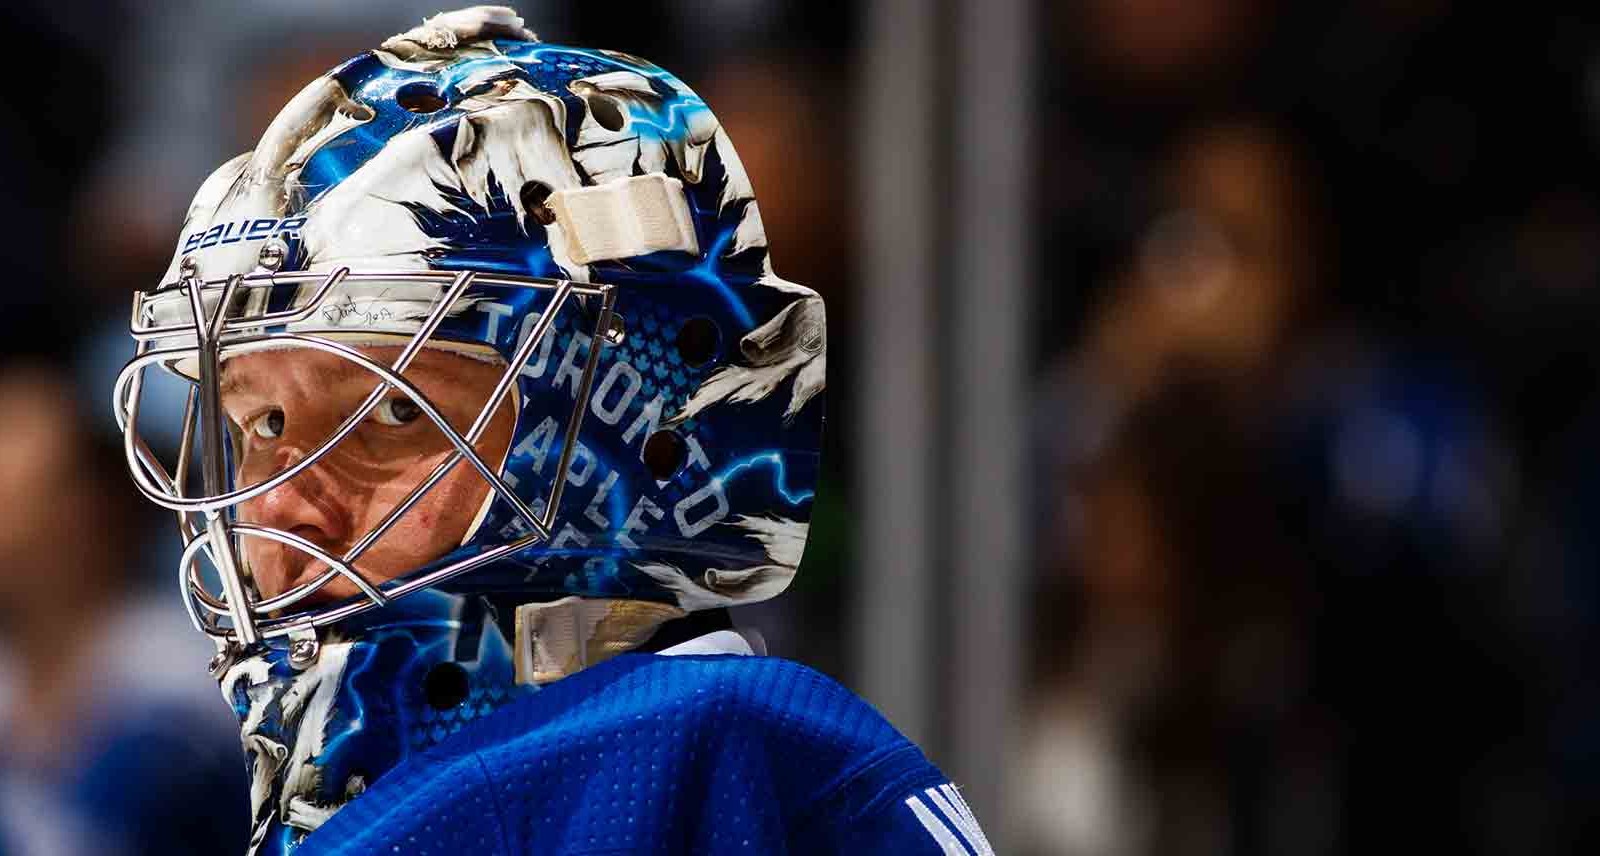 The Maple Leafs' Frederik Andersen on the Weight of Playing in Toronto, Denmark's Tiny Hockey Scene, and John Mayer